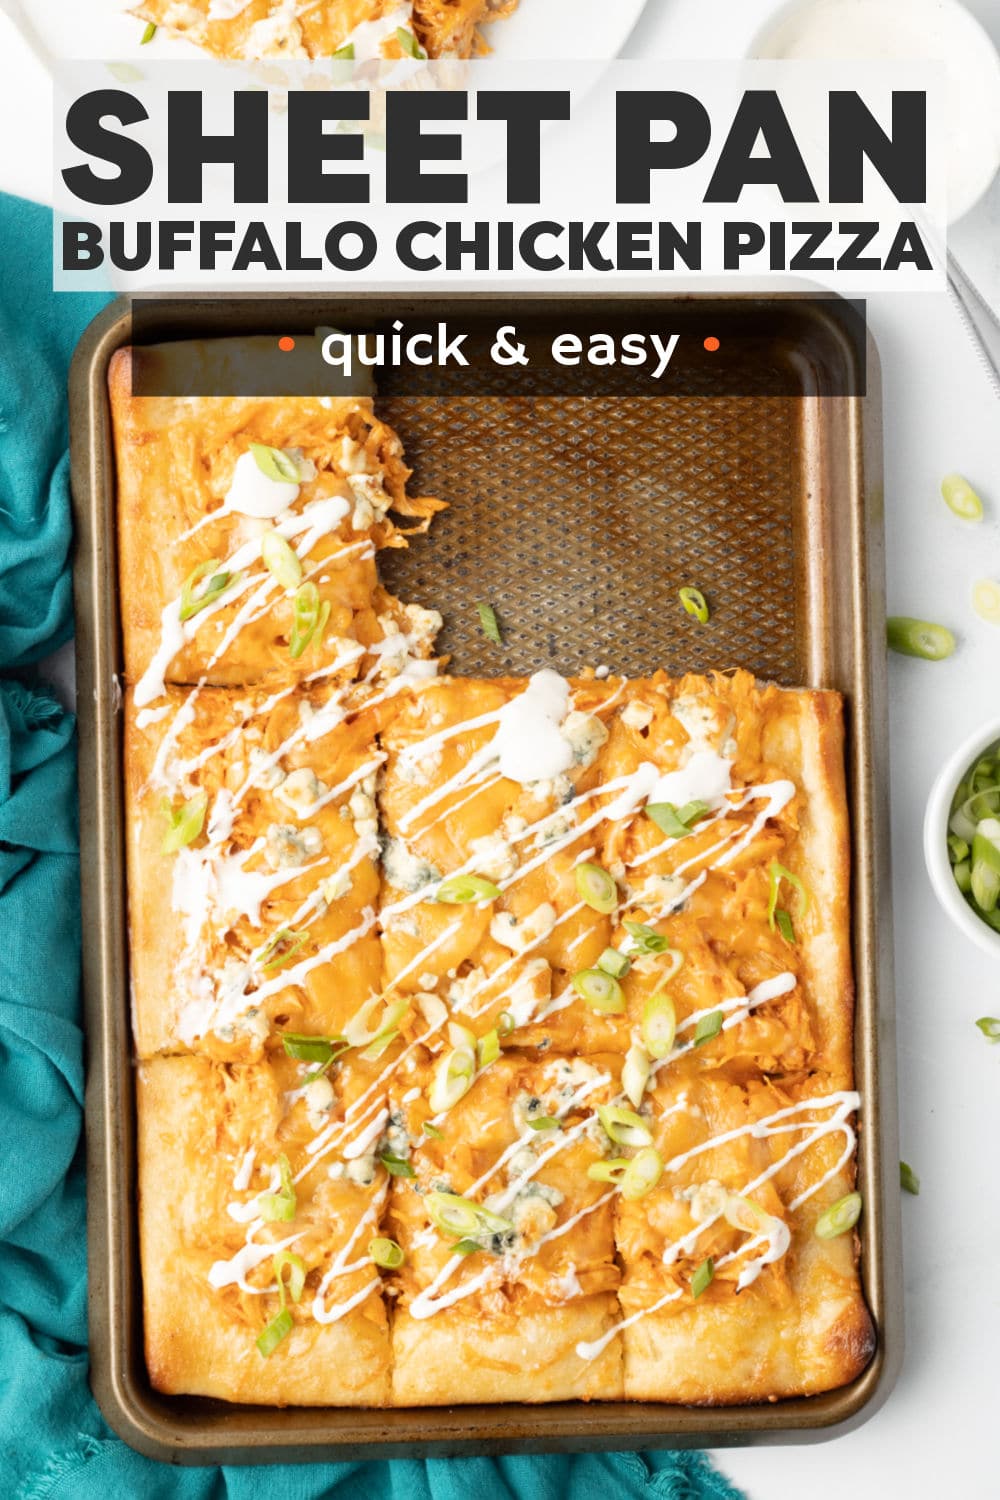 Easy sheet pan Buffalo Chicken Pizza is semi-homemade with a store bought crust topped with spicy buffalo sauce coated chicken, gooey cheese, blue cheese crumbles, and drizzled with creamy ranch dressing. Make it for your next pizza night or game day. | www.persnicketyplates.com